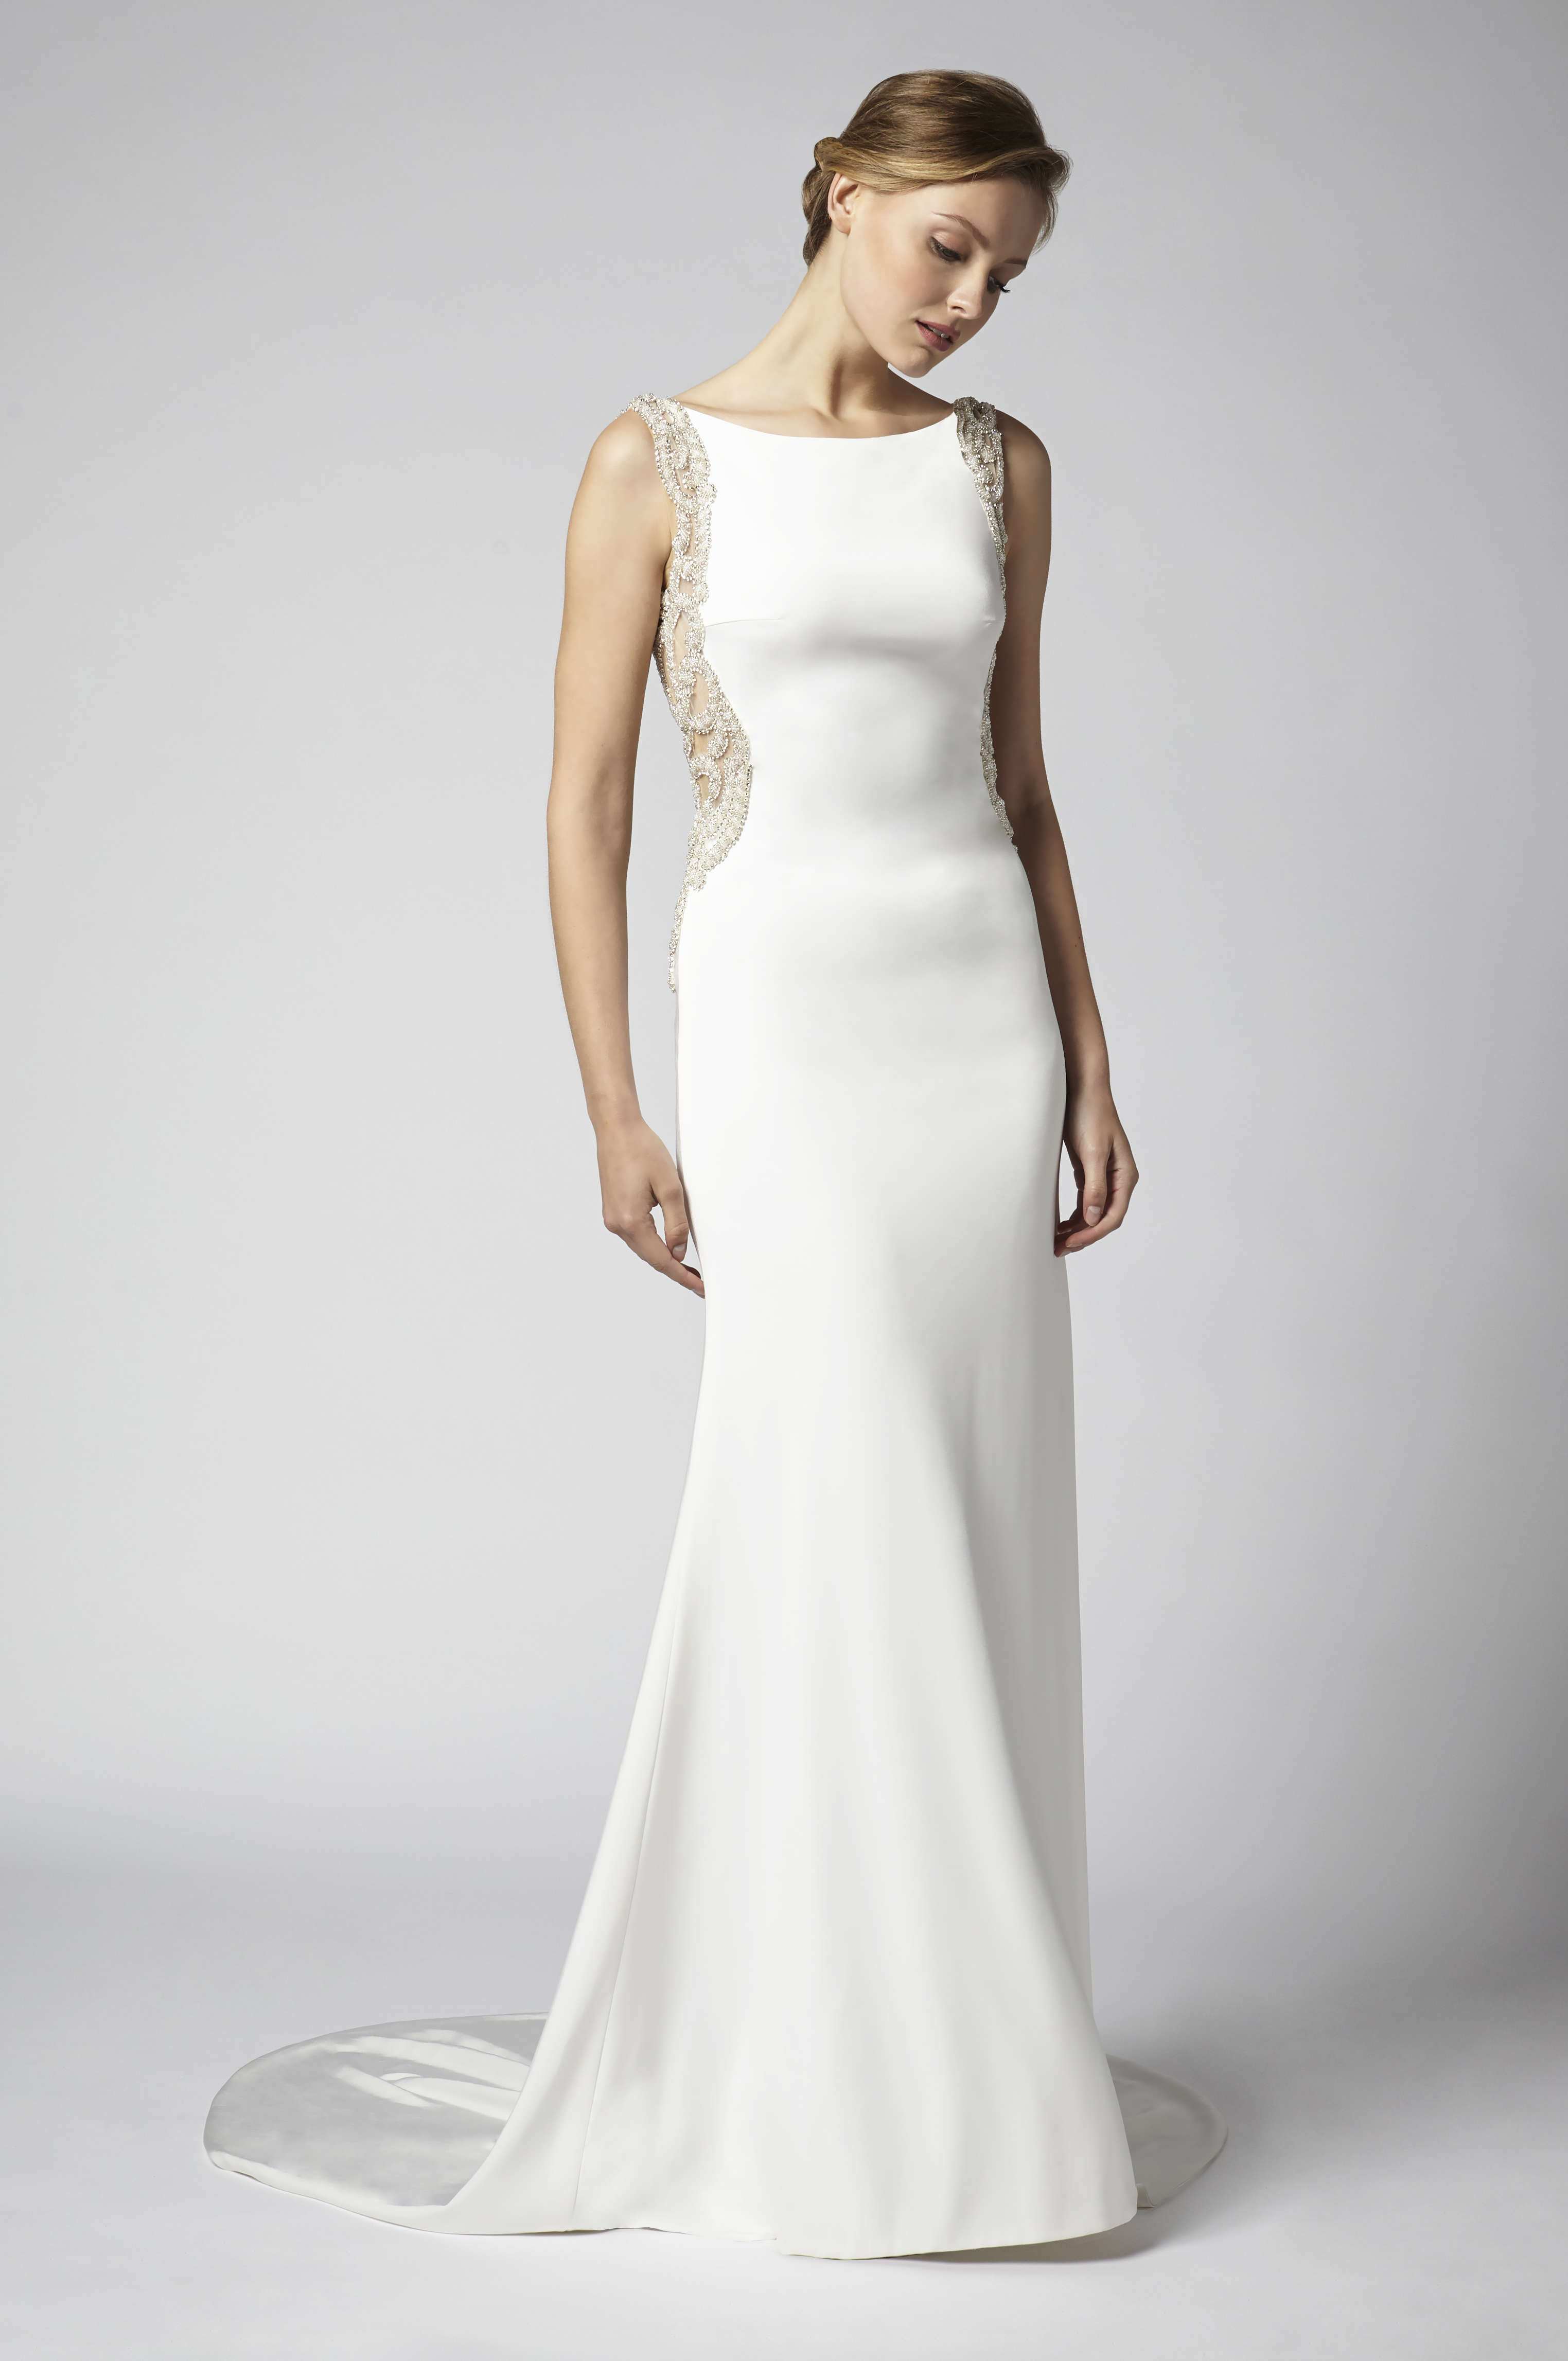 Top Cheap Sheath Wedding Dresses of all time Learn more here 